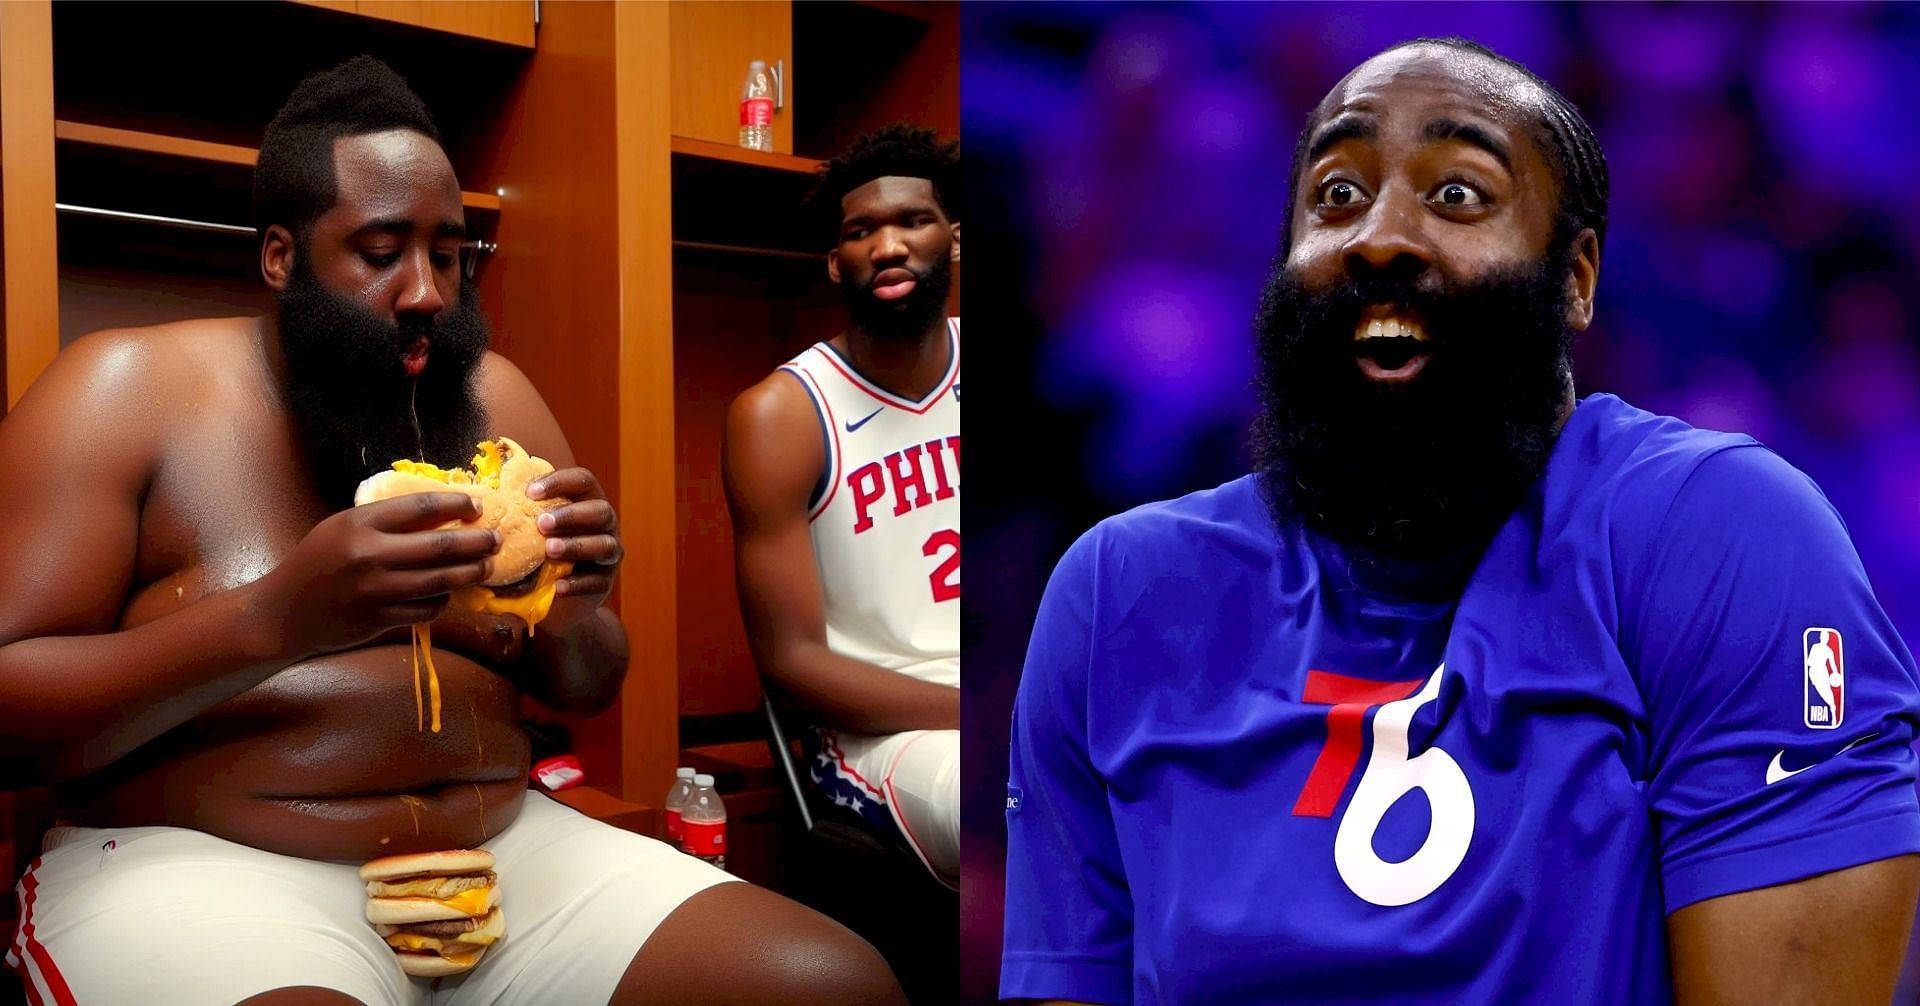 Fact check: Was James Harden spotted with burger in locker room? Viral image debunked